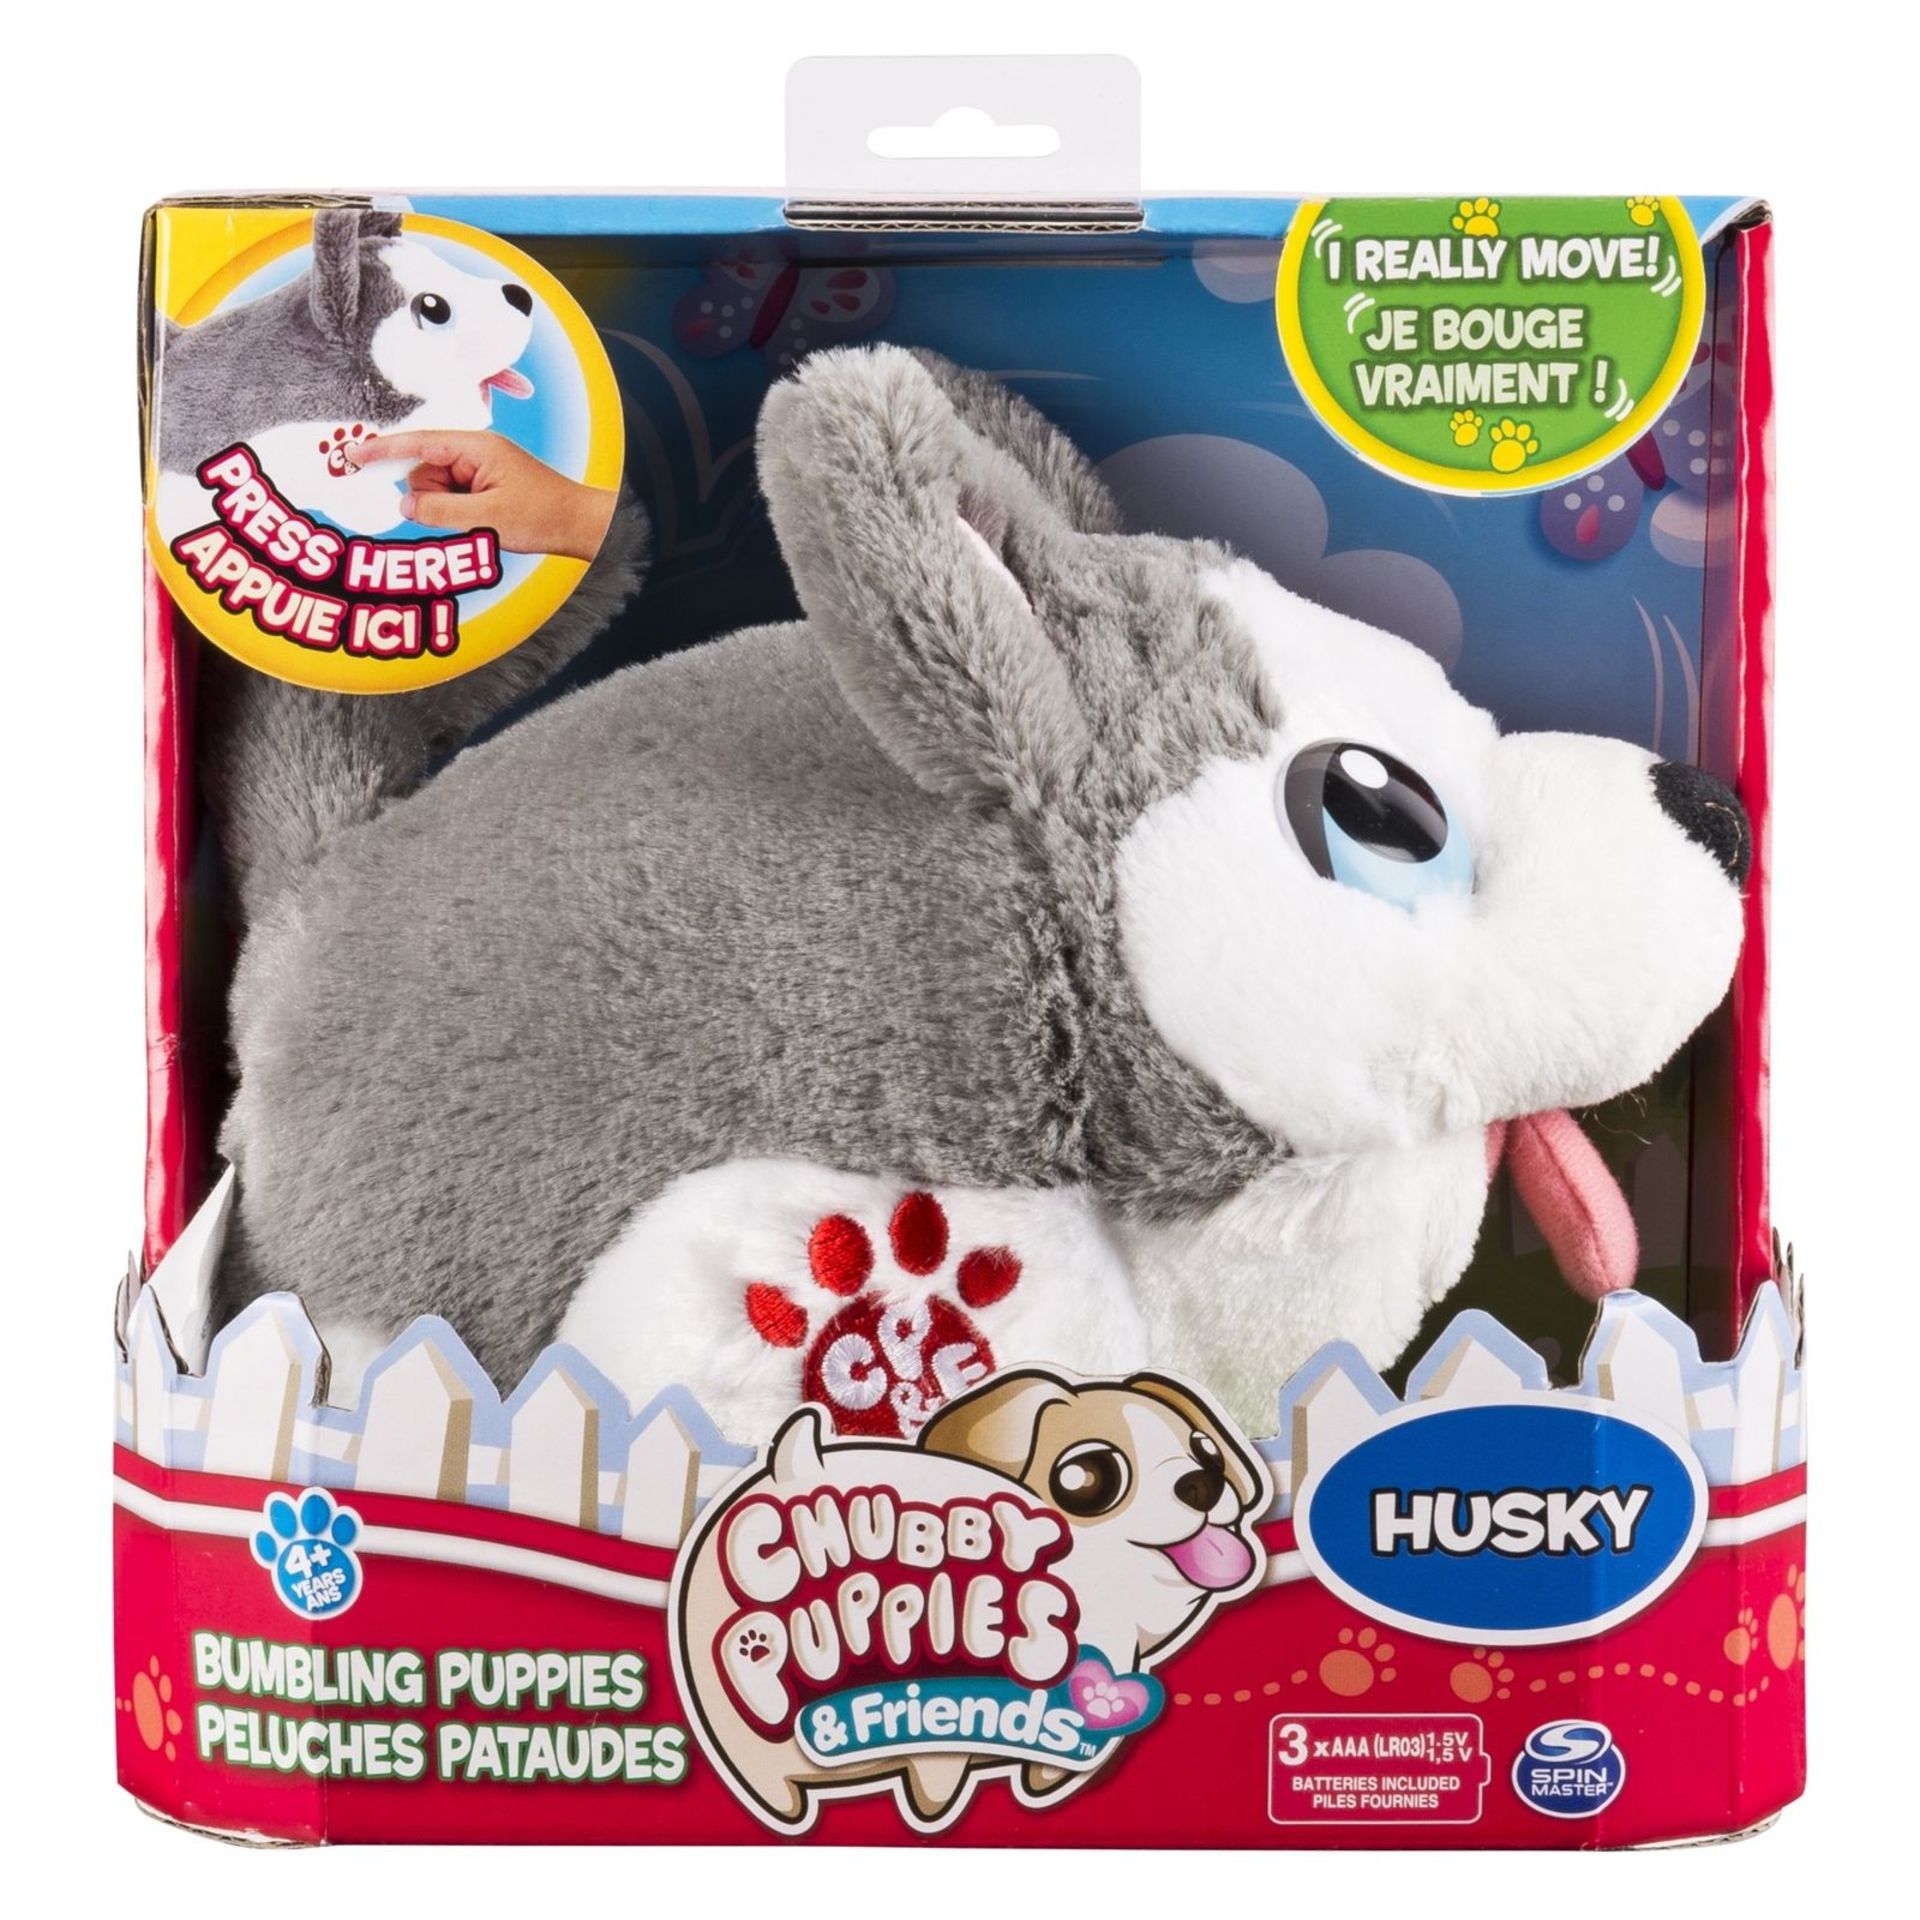 V Brand New Chubby Puppies & Friends - Husky - Storkz.com Price £24.83 - Moves When You Press Button - Image 2 of 3